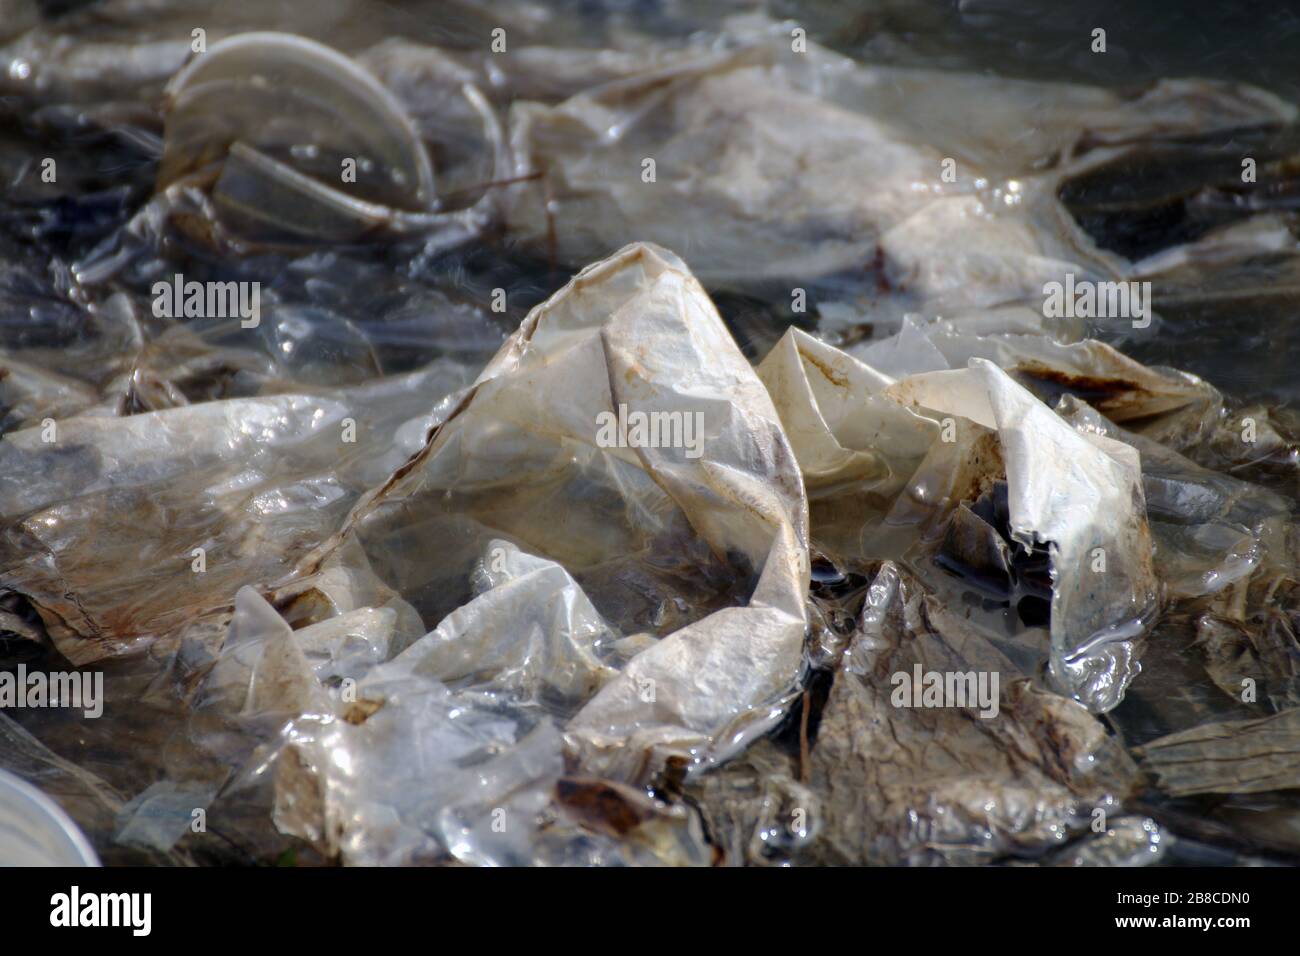 Waste plastic, Dirty plastic bags on the surface water, Waste plastic bags do not Decomposed garbage, Polluting nature ecological water dirty, Waste w Stock Photo